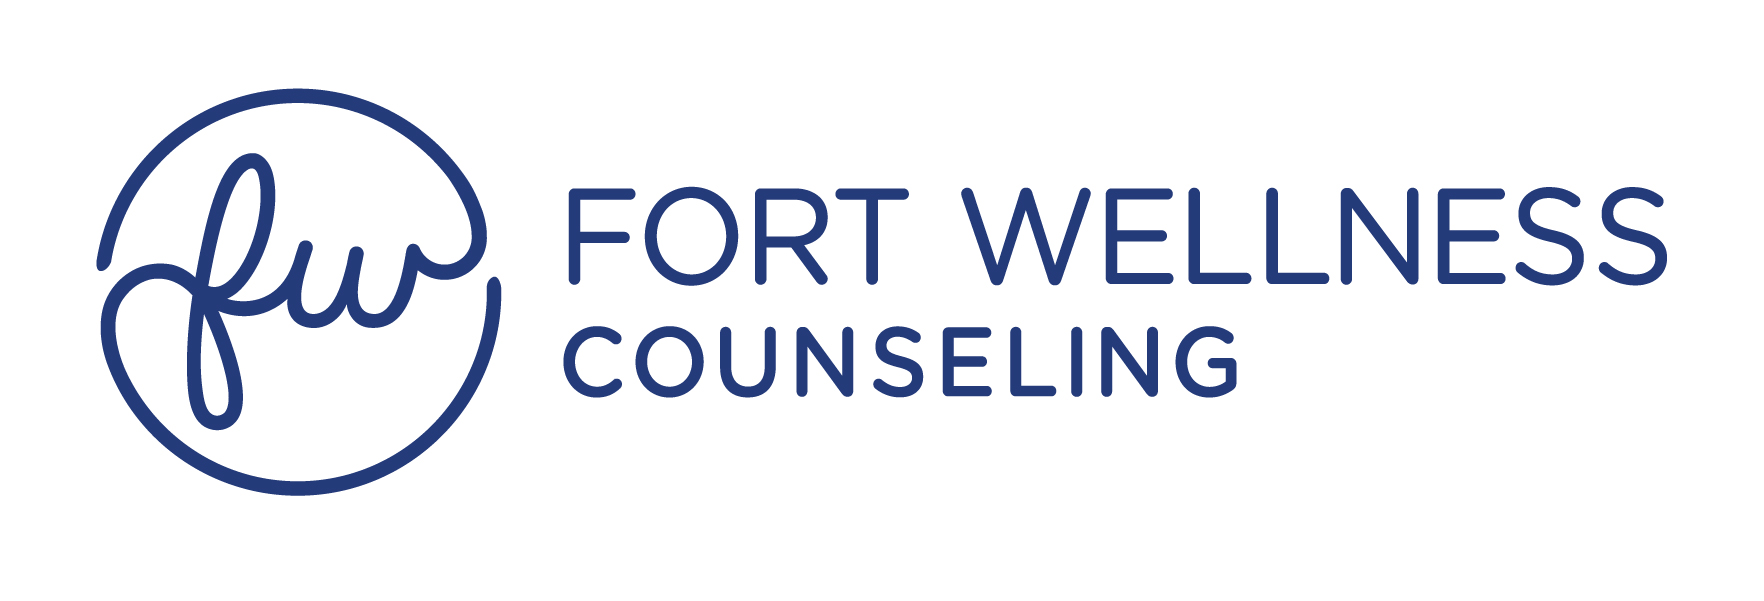 Fort Wellness Counseling Logo